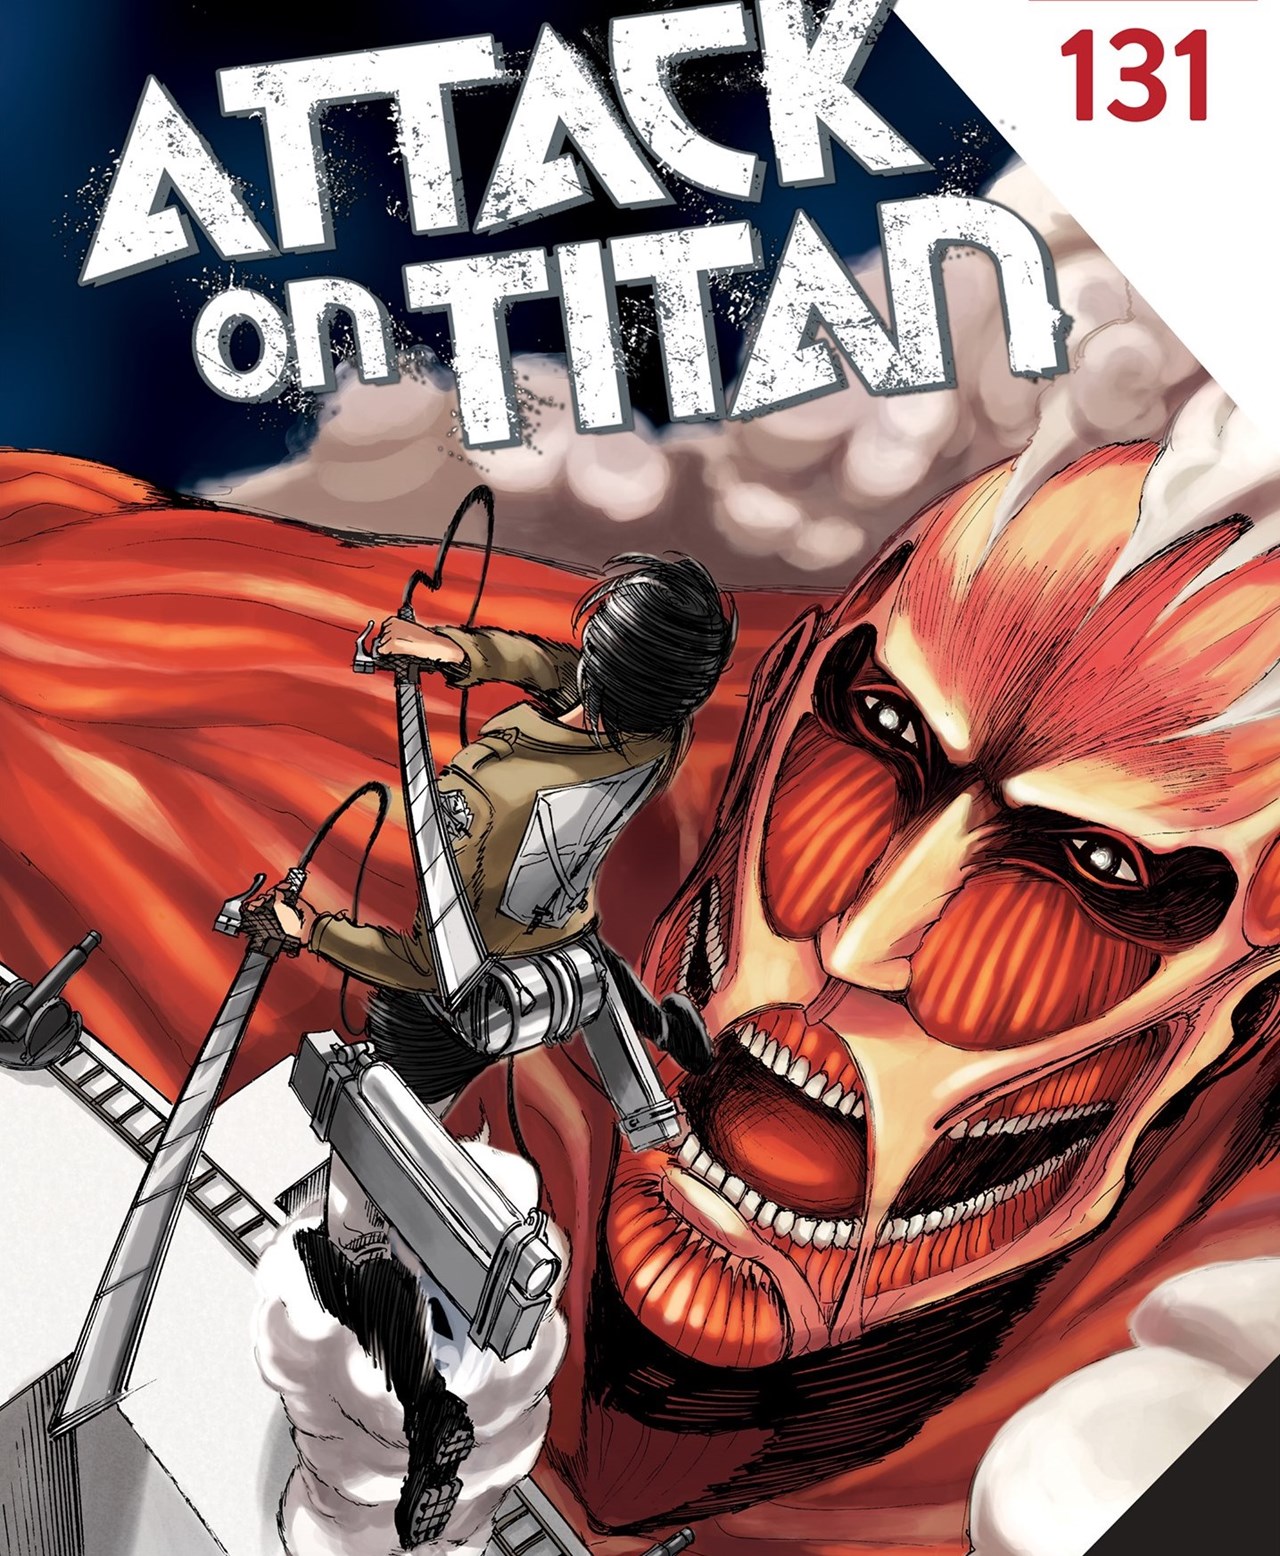 Attack on Titan Season 4 Part 3 release dates, time, and full